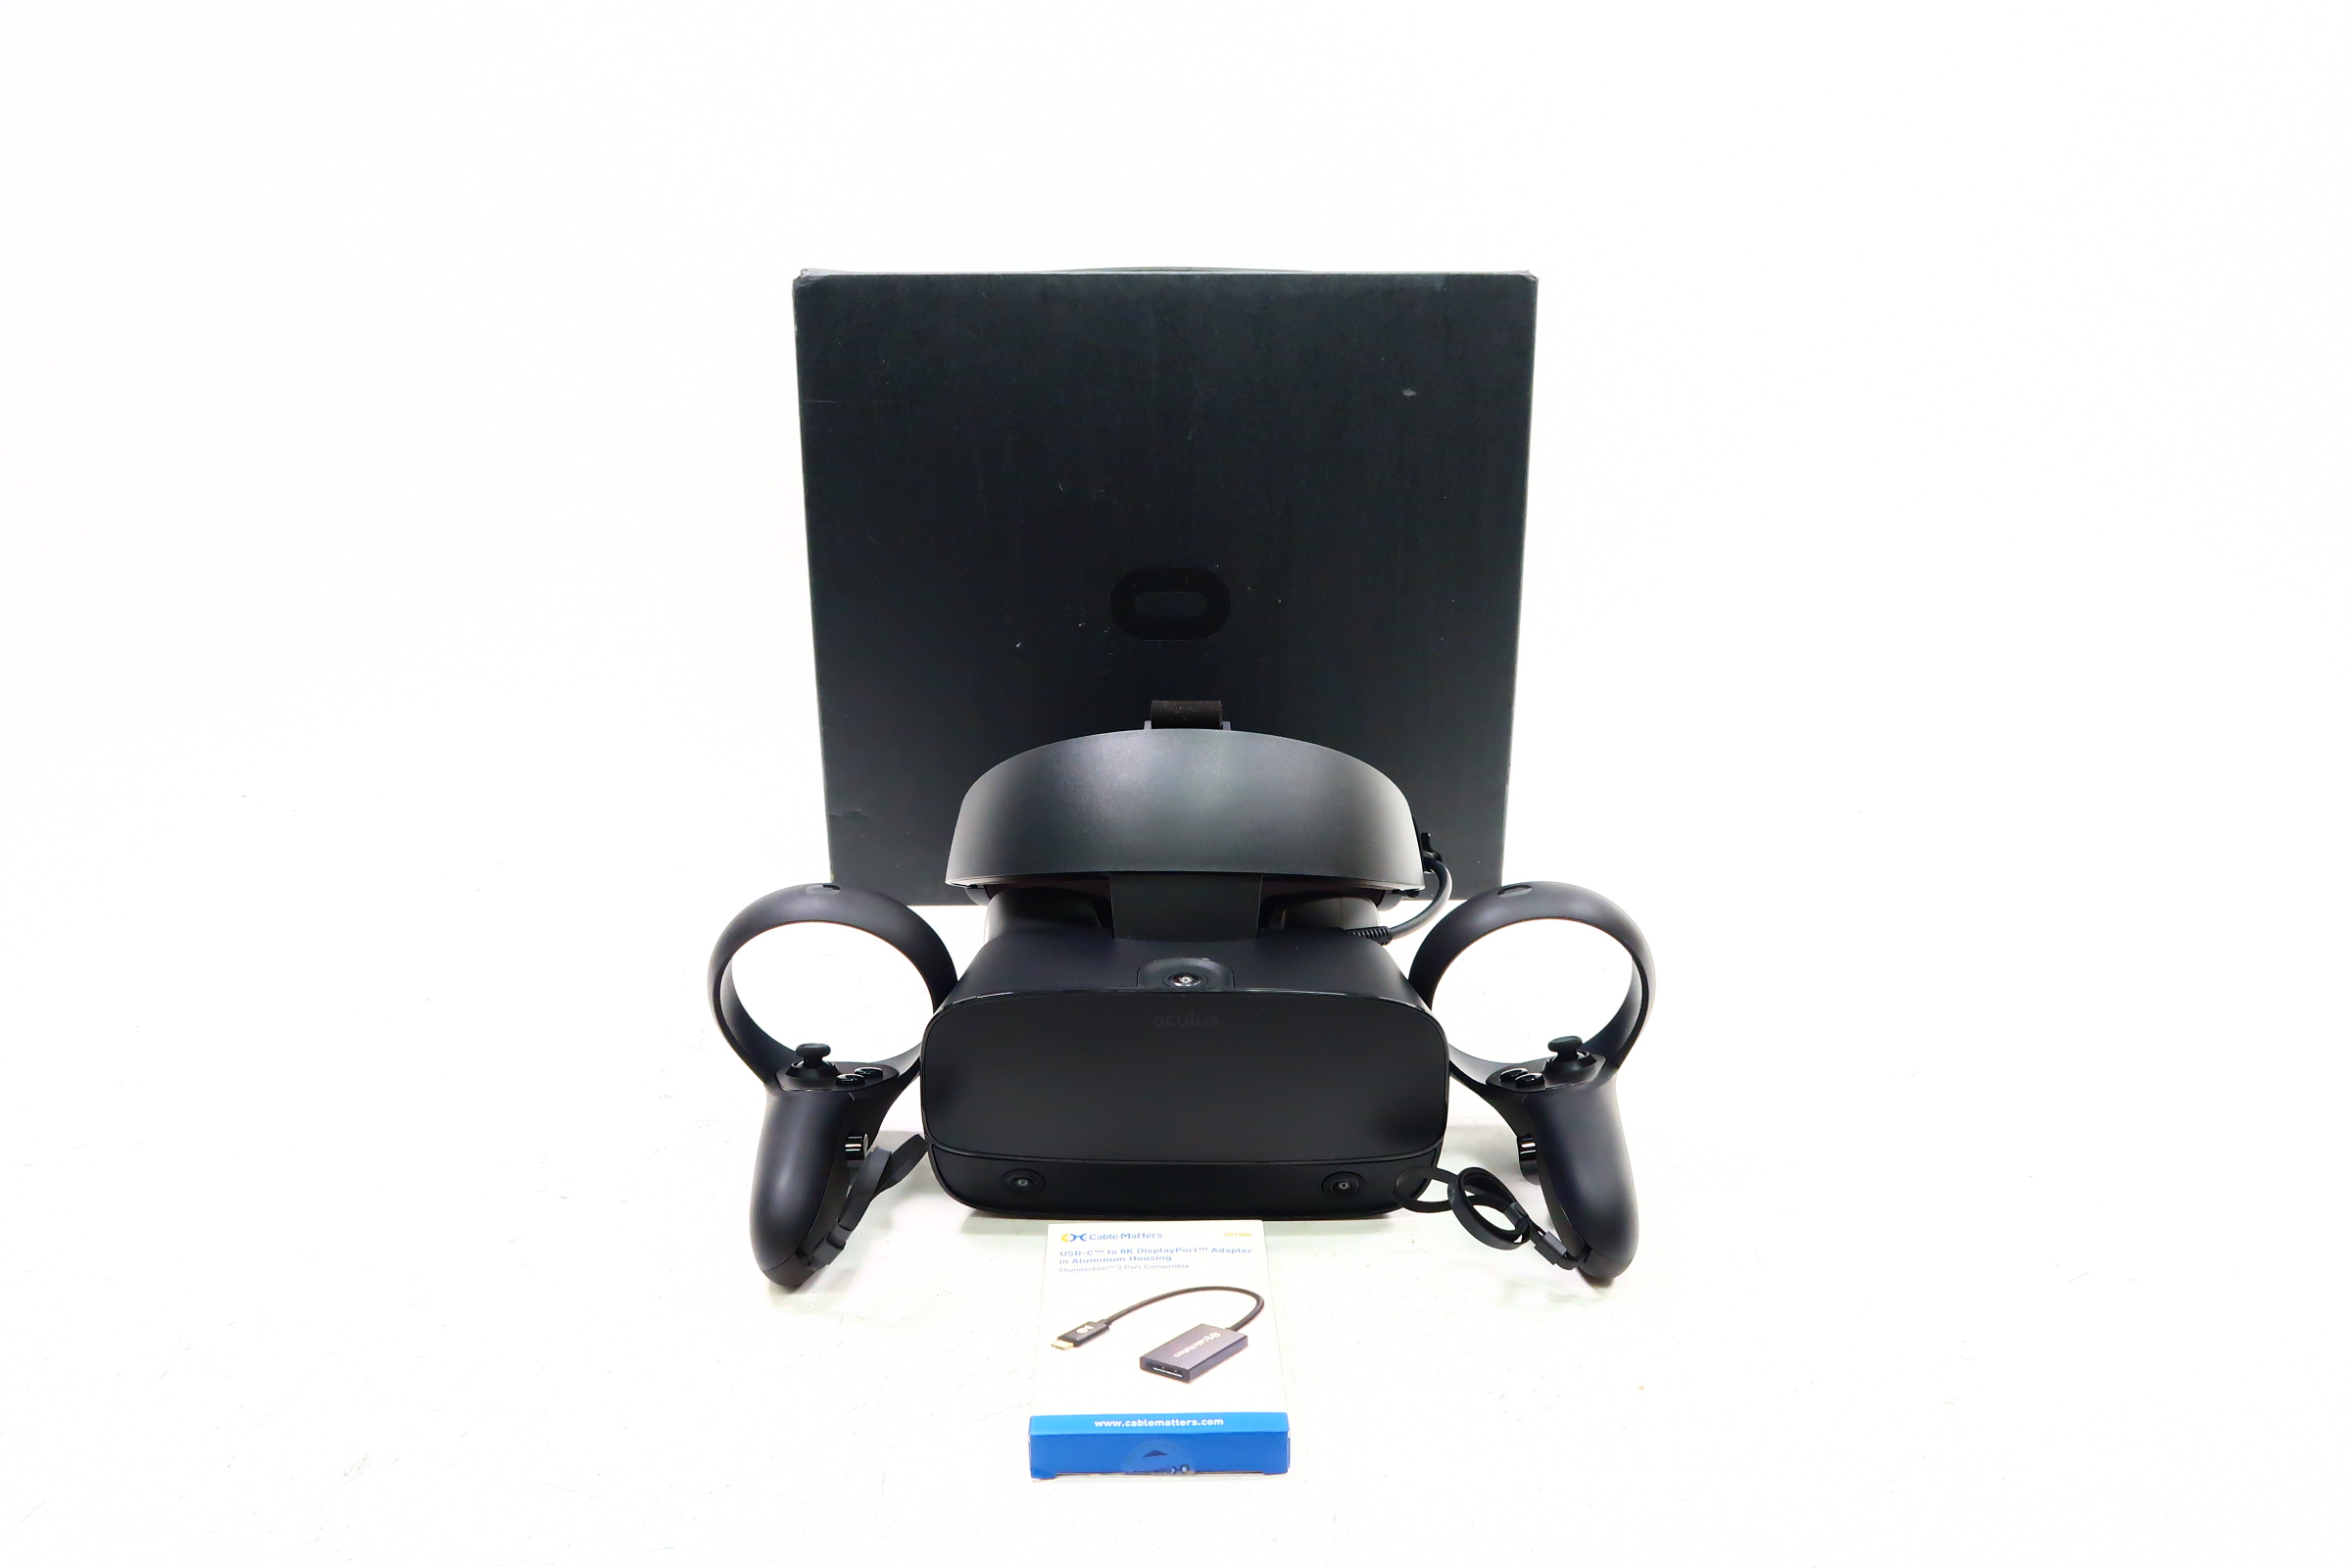 Why You Should Buy The Oculus Rift S 